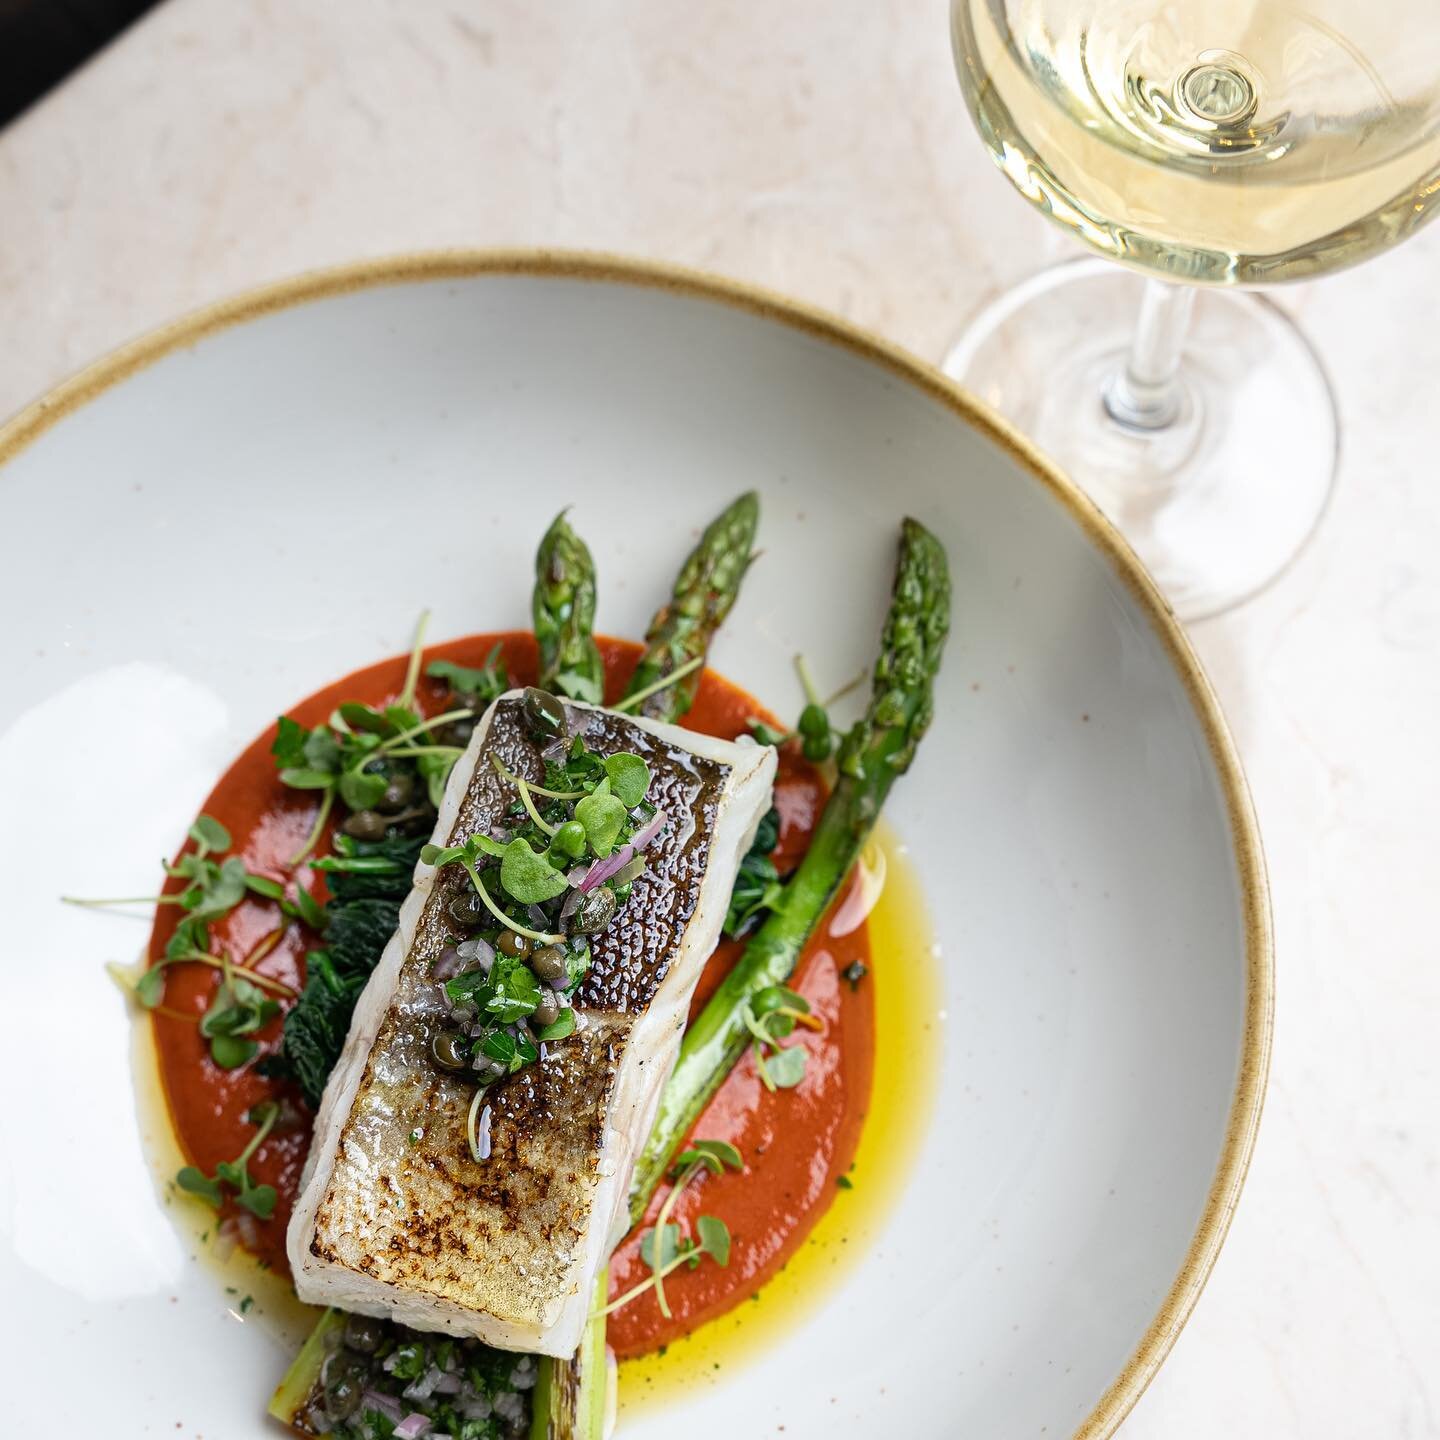 Fresh &amp; delicate, yet full of flavour 👌🏼 Our Roast Cornish Cod with red pepper sauce, asparagus &amp; salsa verde. Accompanied by a chilled glass of Gavi DOCG Del Comune di Gavi Gran&eacute;e - hello weekend!
.
.
.
.
#TerraModerna #BelsizePark 